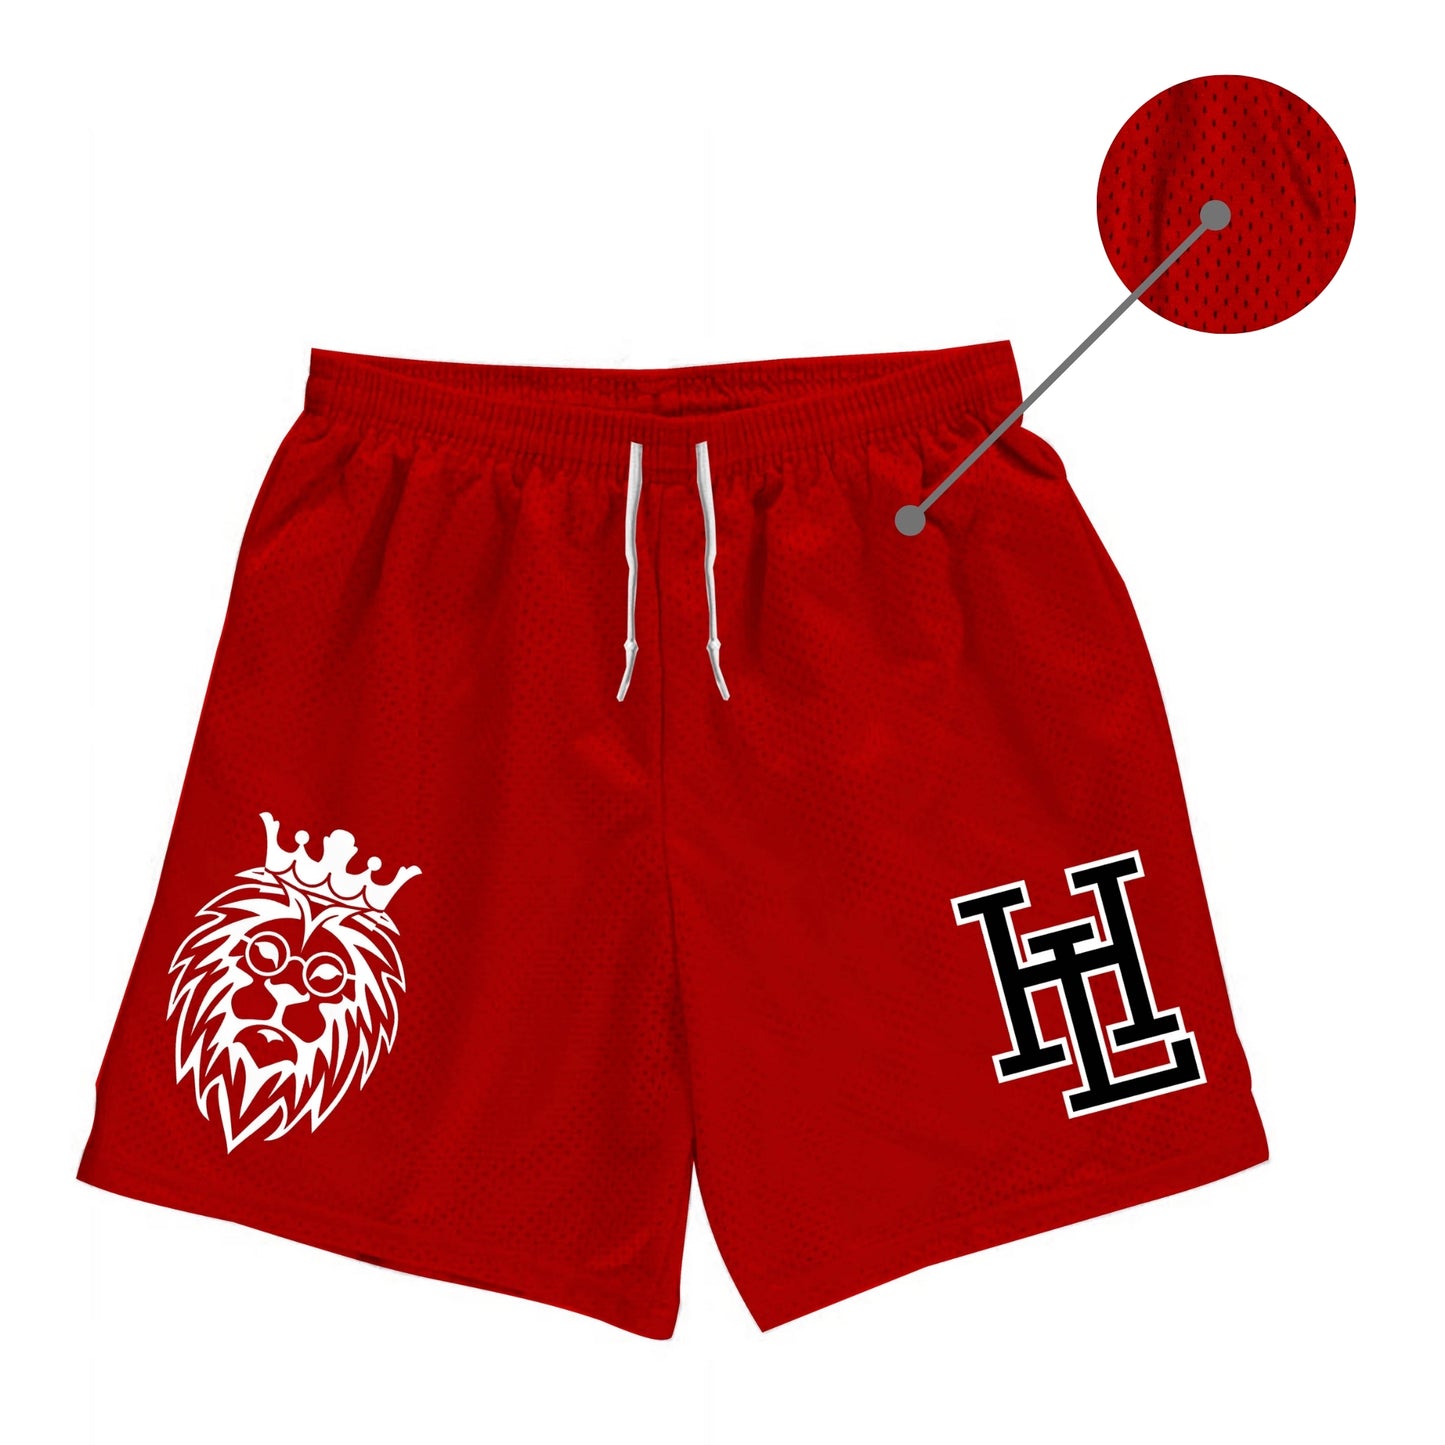 Jersey Mesh Gym Shorts - Red